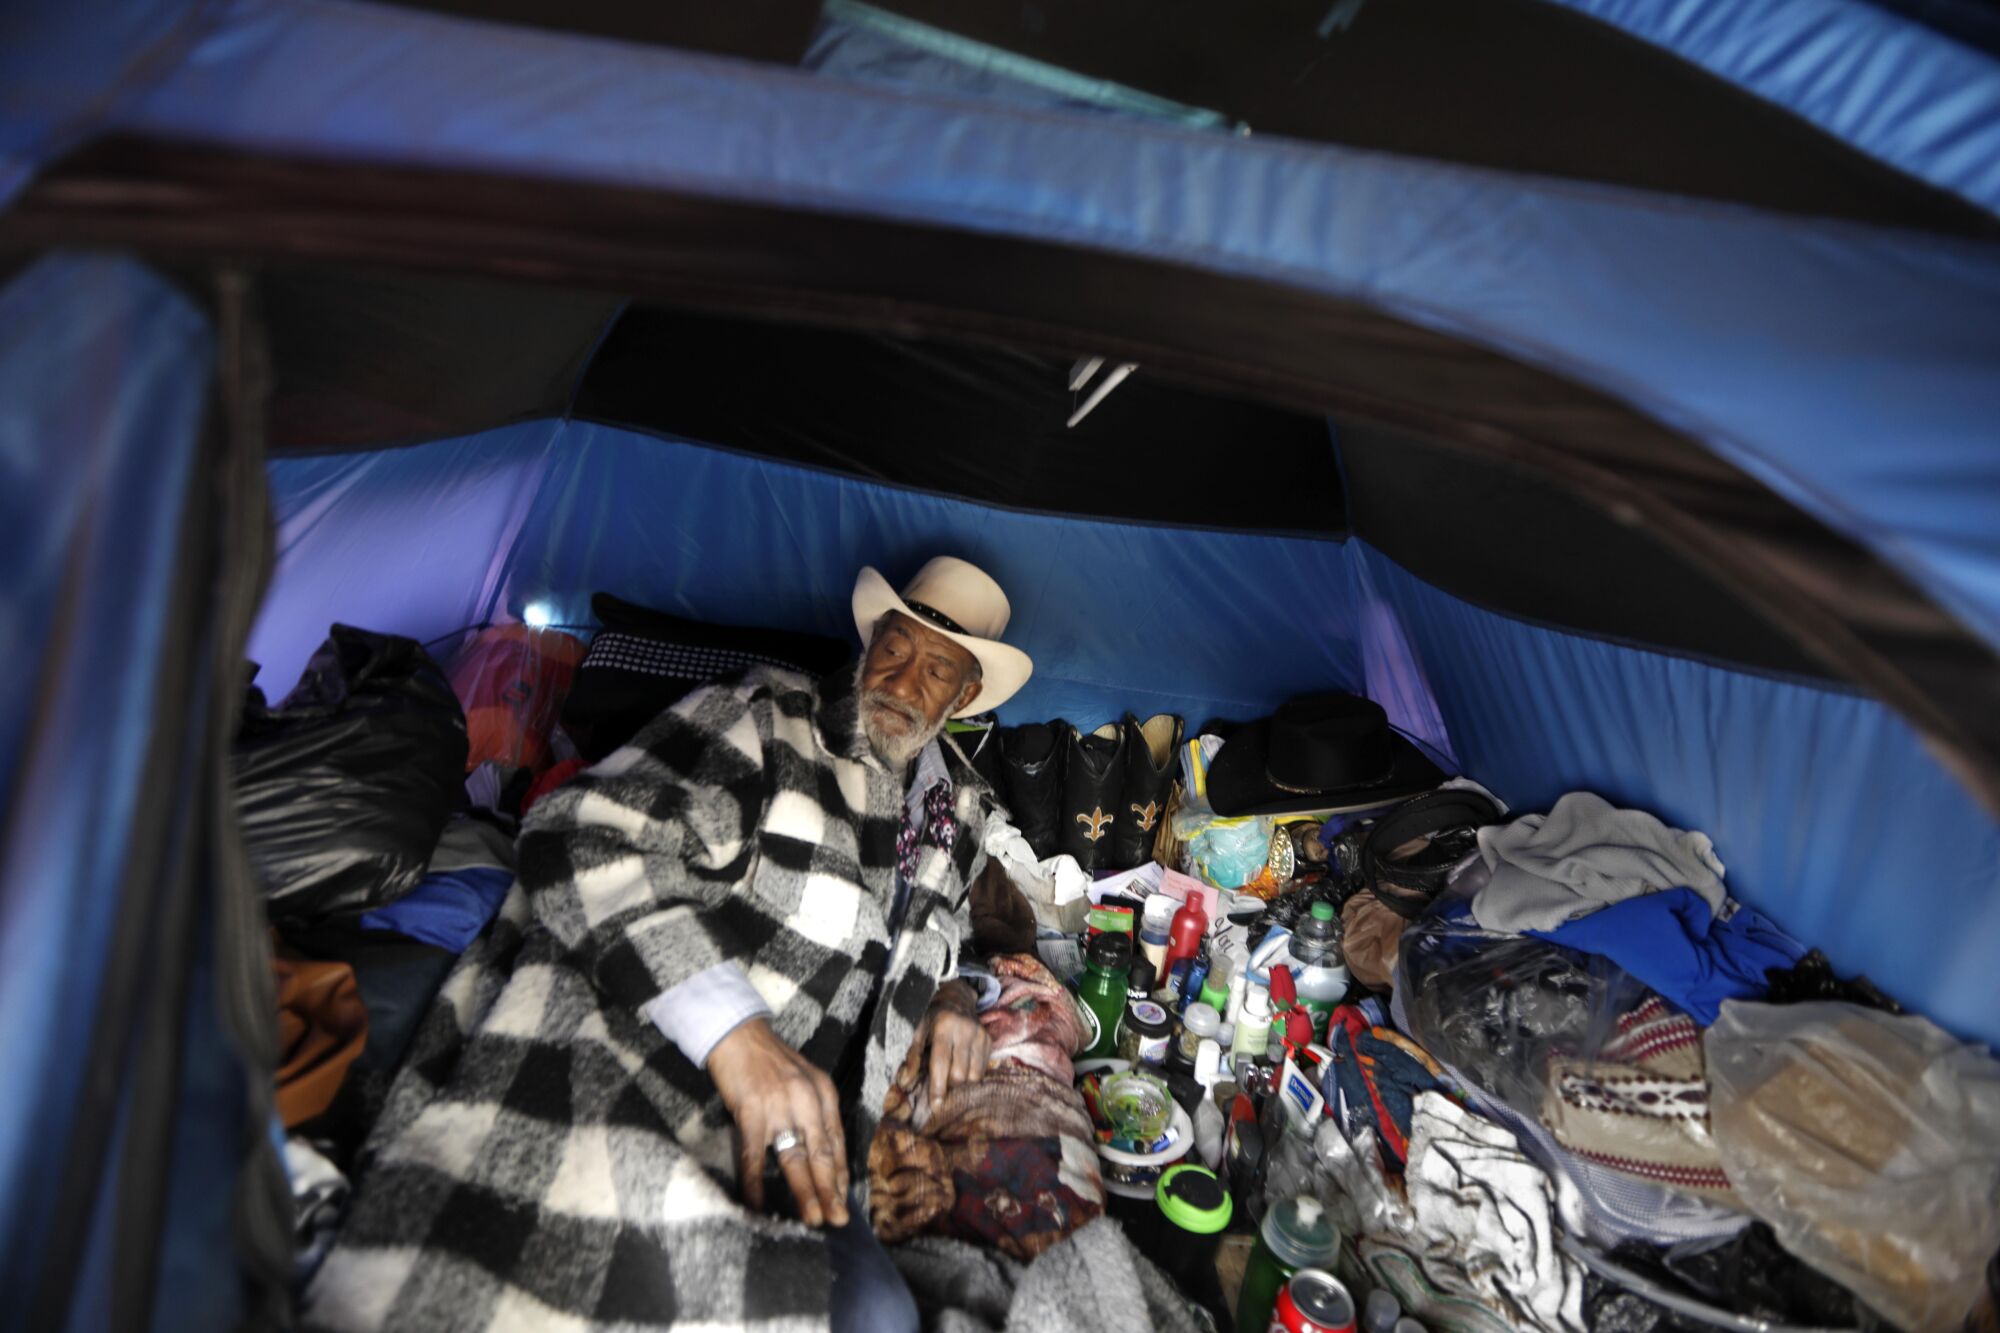 A older man rests inside his tent with his belongings.